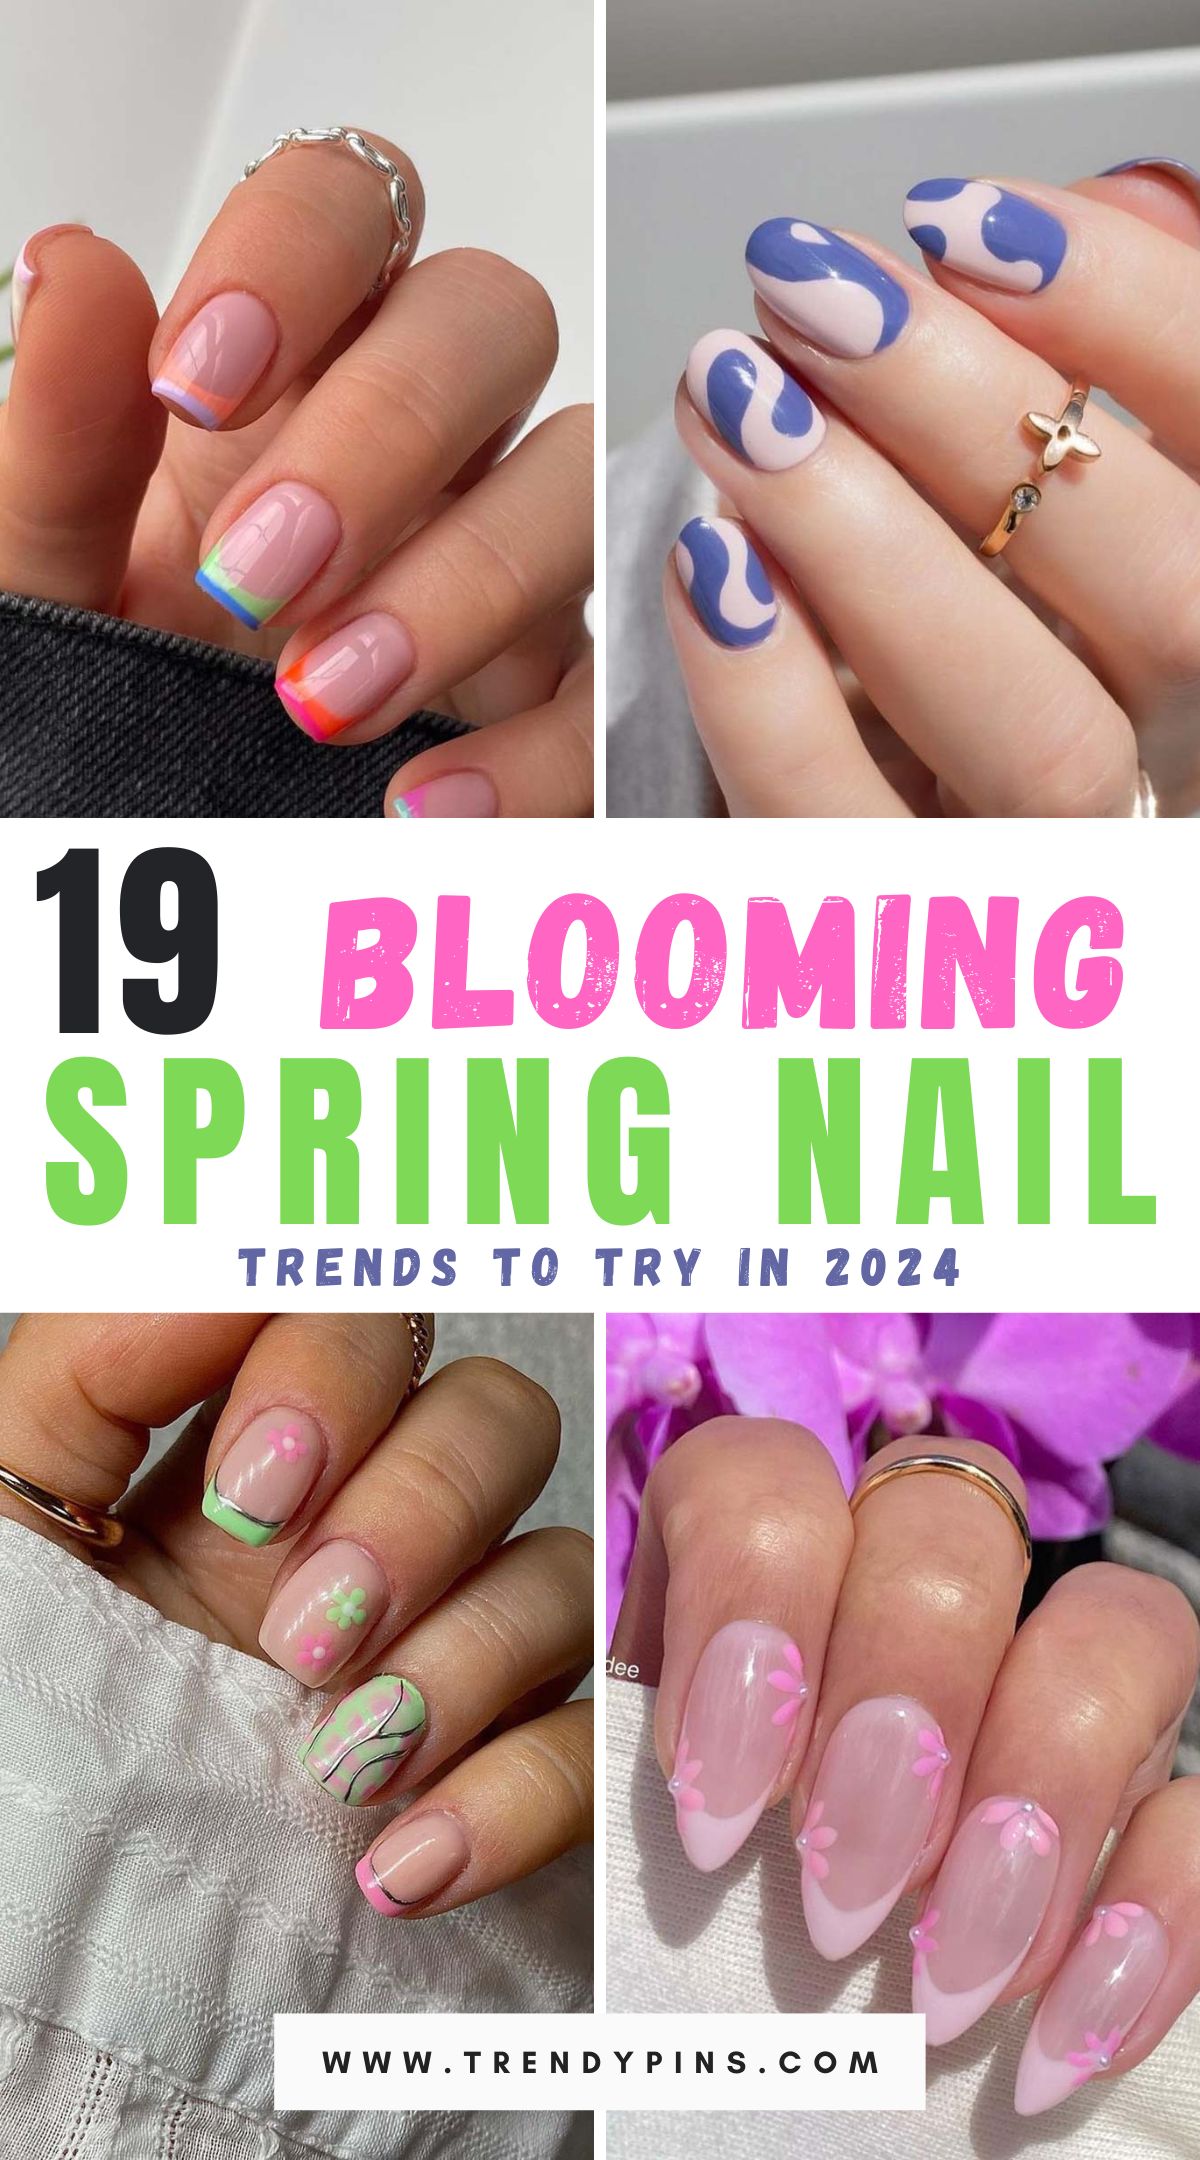 Bloom into the new season with these 19 spring nail trends blooming in 2024. Explore the latest styles and designs to keep your manicure fresh and on-trend all season long.